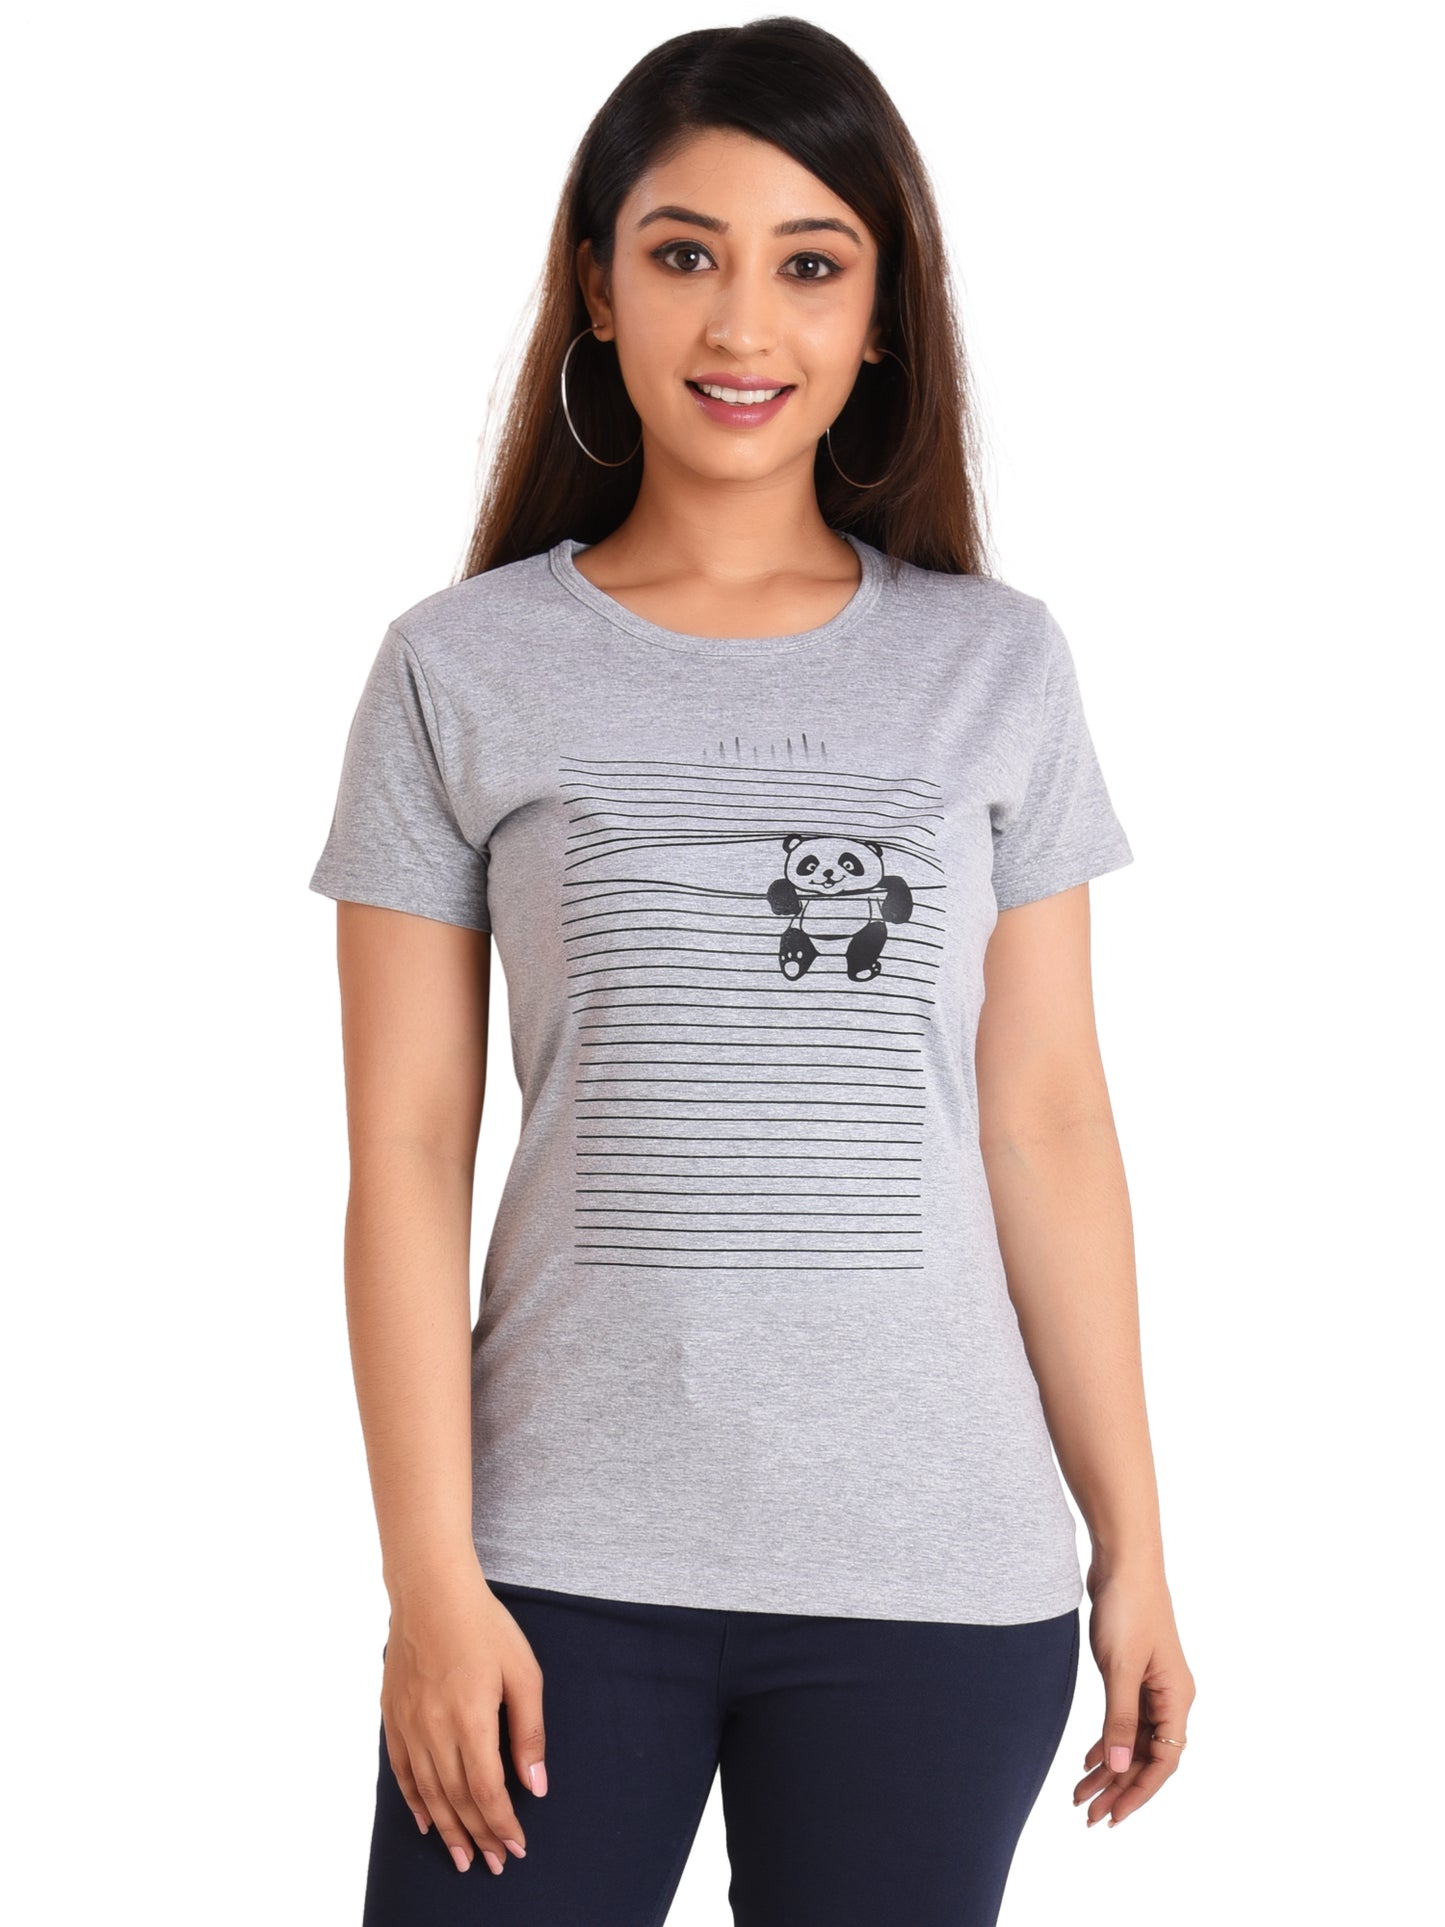 NEO GARMENTS Women's Cotton Round Neck T-shirt - PANDA. | SIZE FROM S-32" TO 8XL-52"